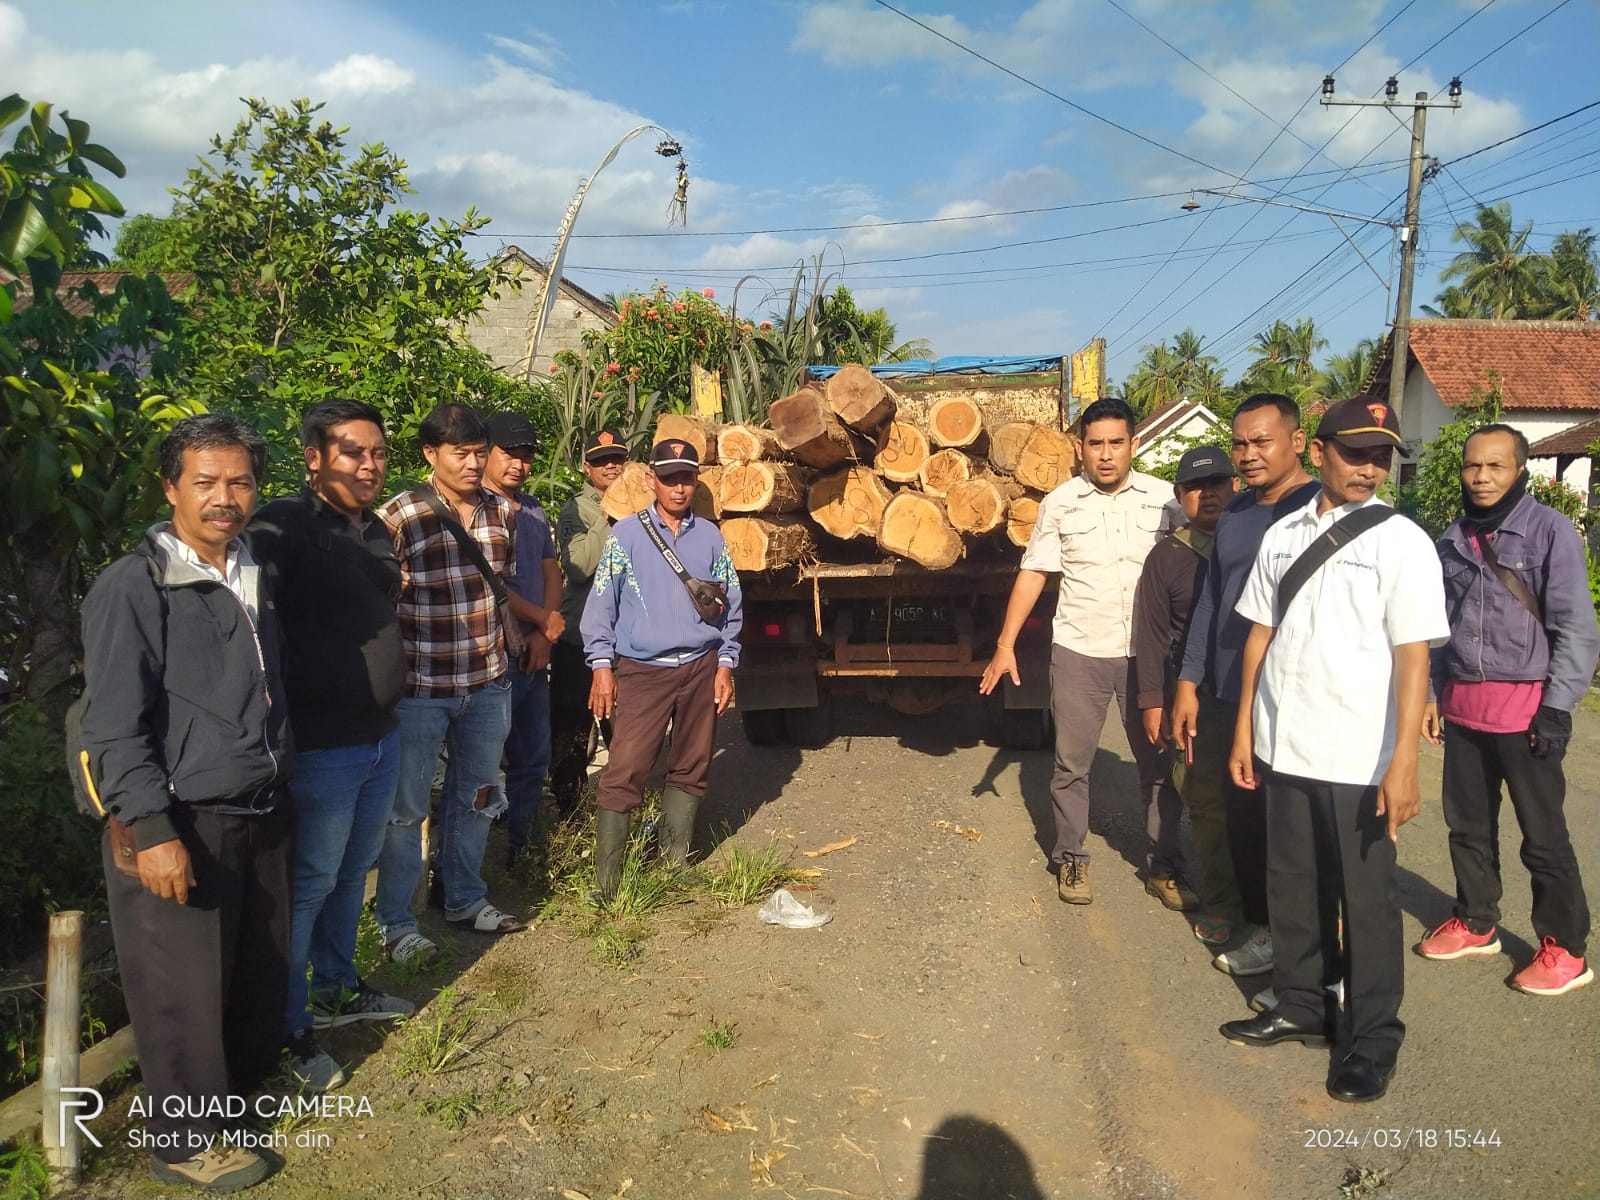 joint-officer-returns-finds-pile-of-teak-wood-allegedly-illegal-in-siliragung